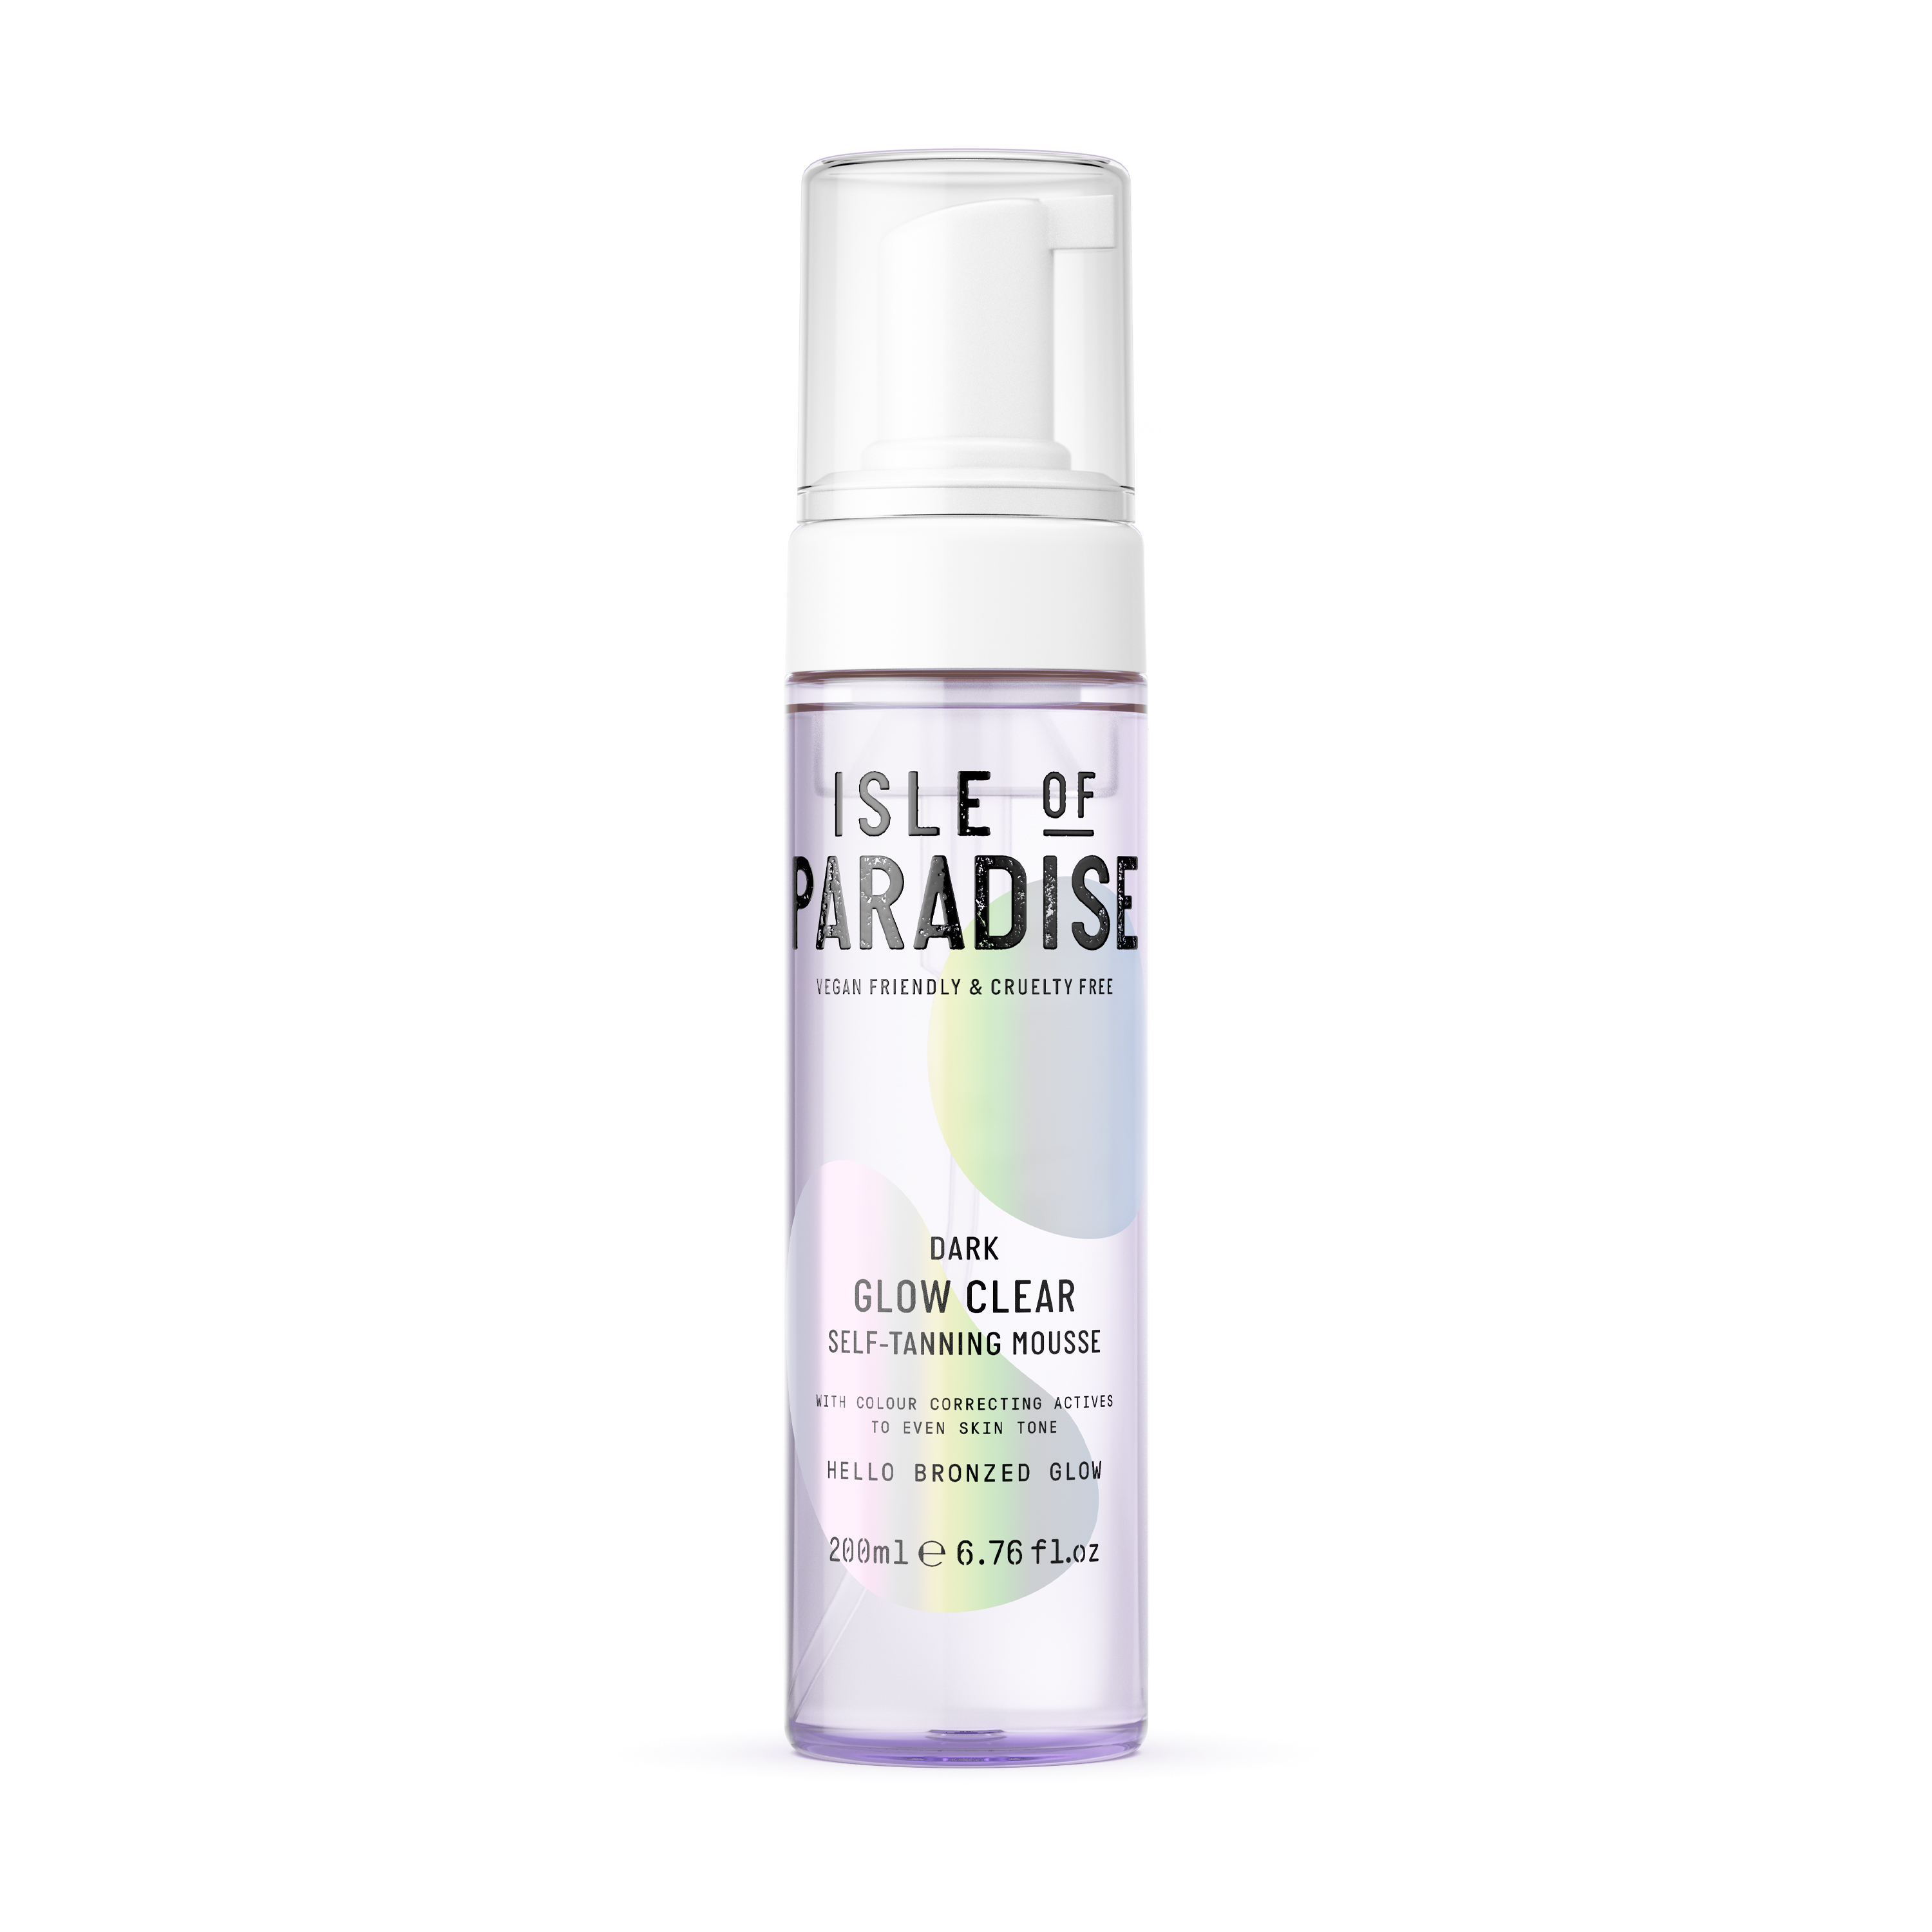 ISLE OF PARADISE Dark Glow Clear Self Tanning Mousse 200 ml